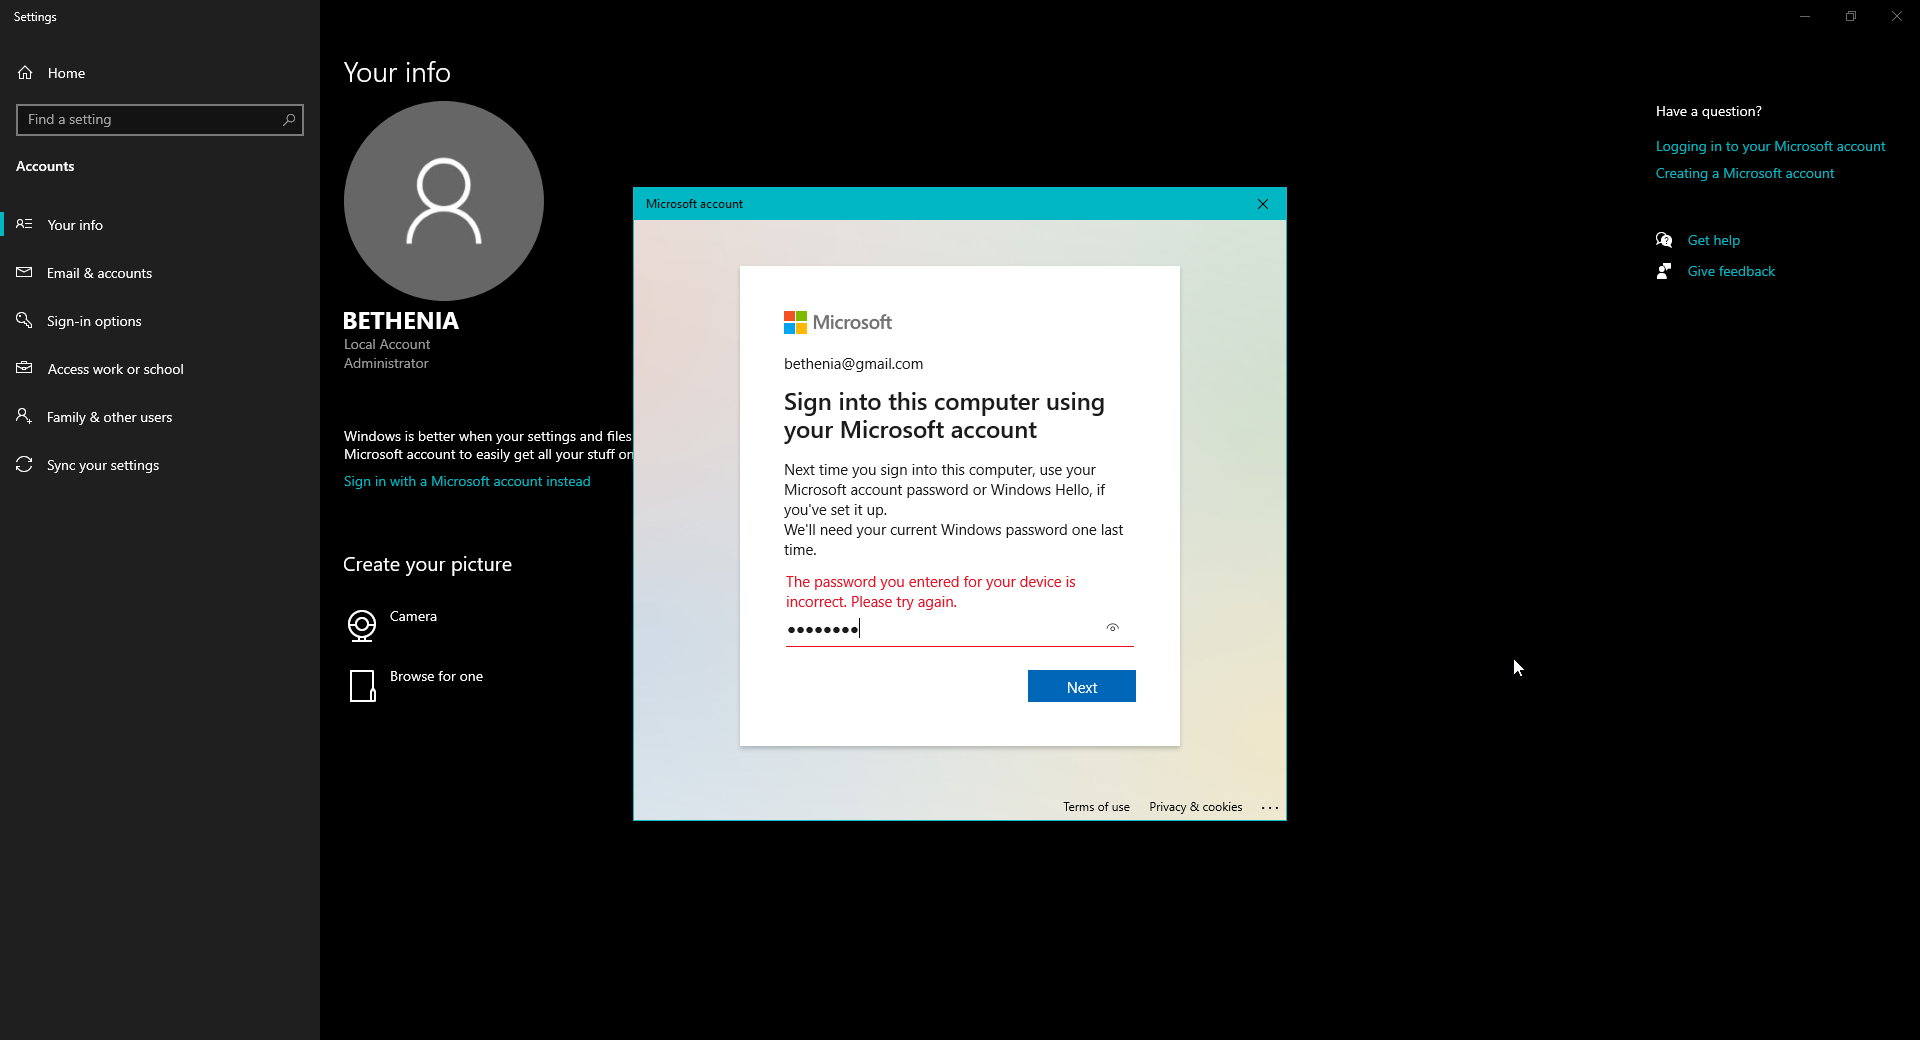 Unable to login to windows with Microsoft account. Says incorrect password, so I reset it... b49aafee-a10b-414a-a663-ea233a322c45?upload=true.png